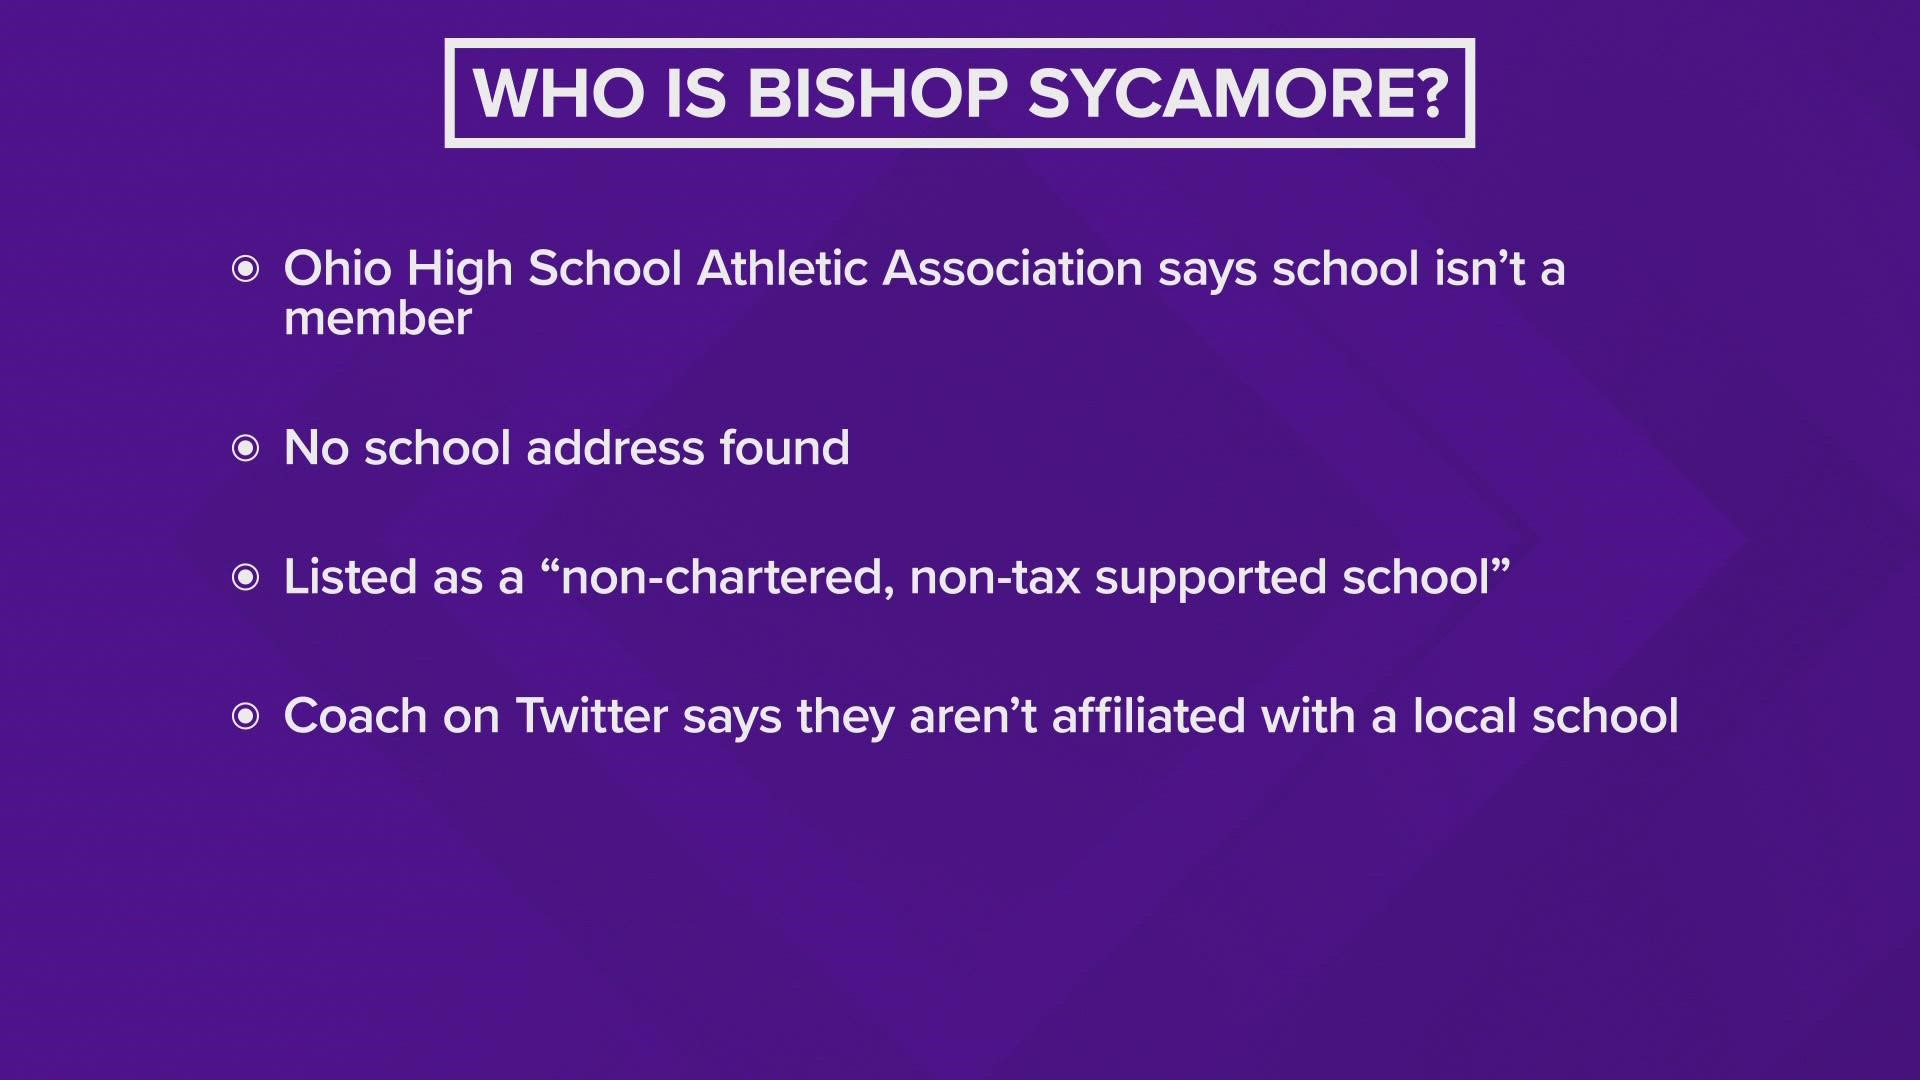 The Bishop Sycamore football coach appeared to say on Twitter that they weren't affiliated with a local school, but that the team is from an online program.